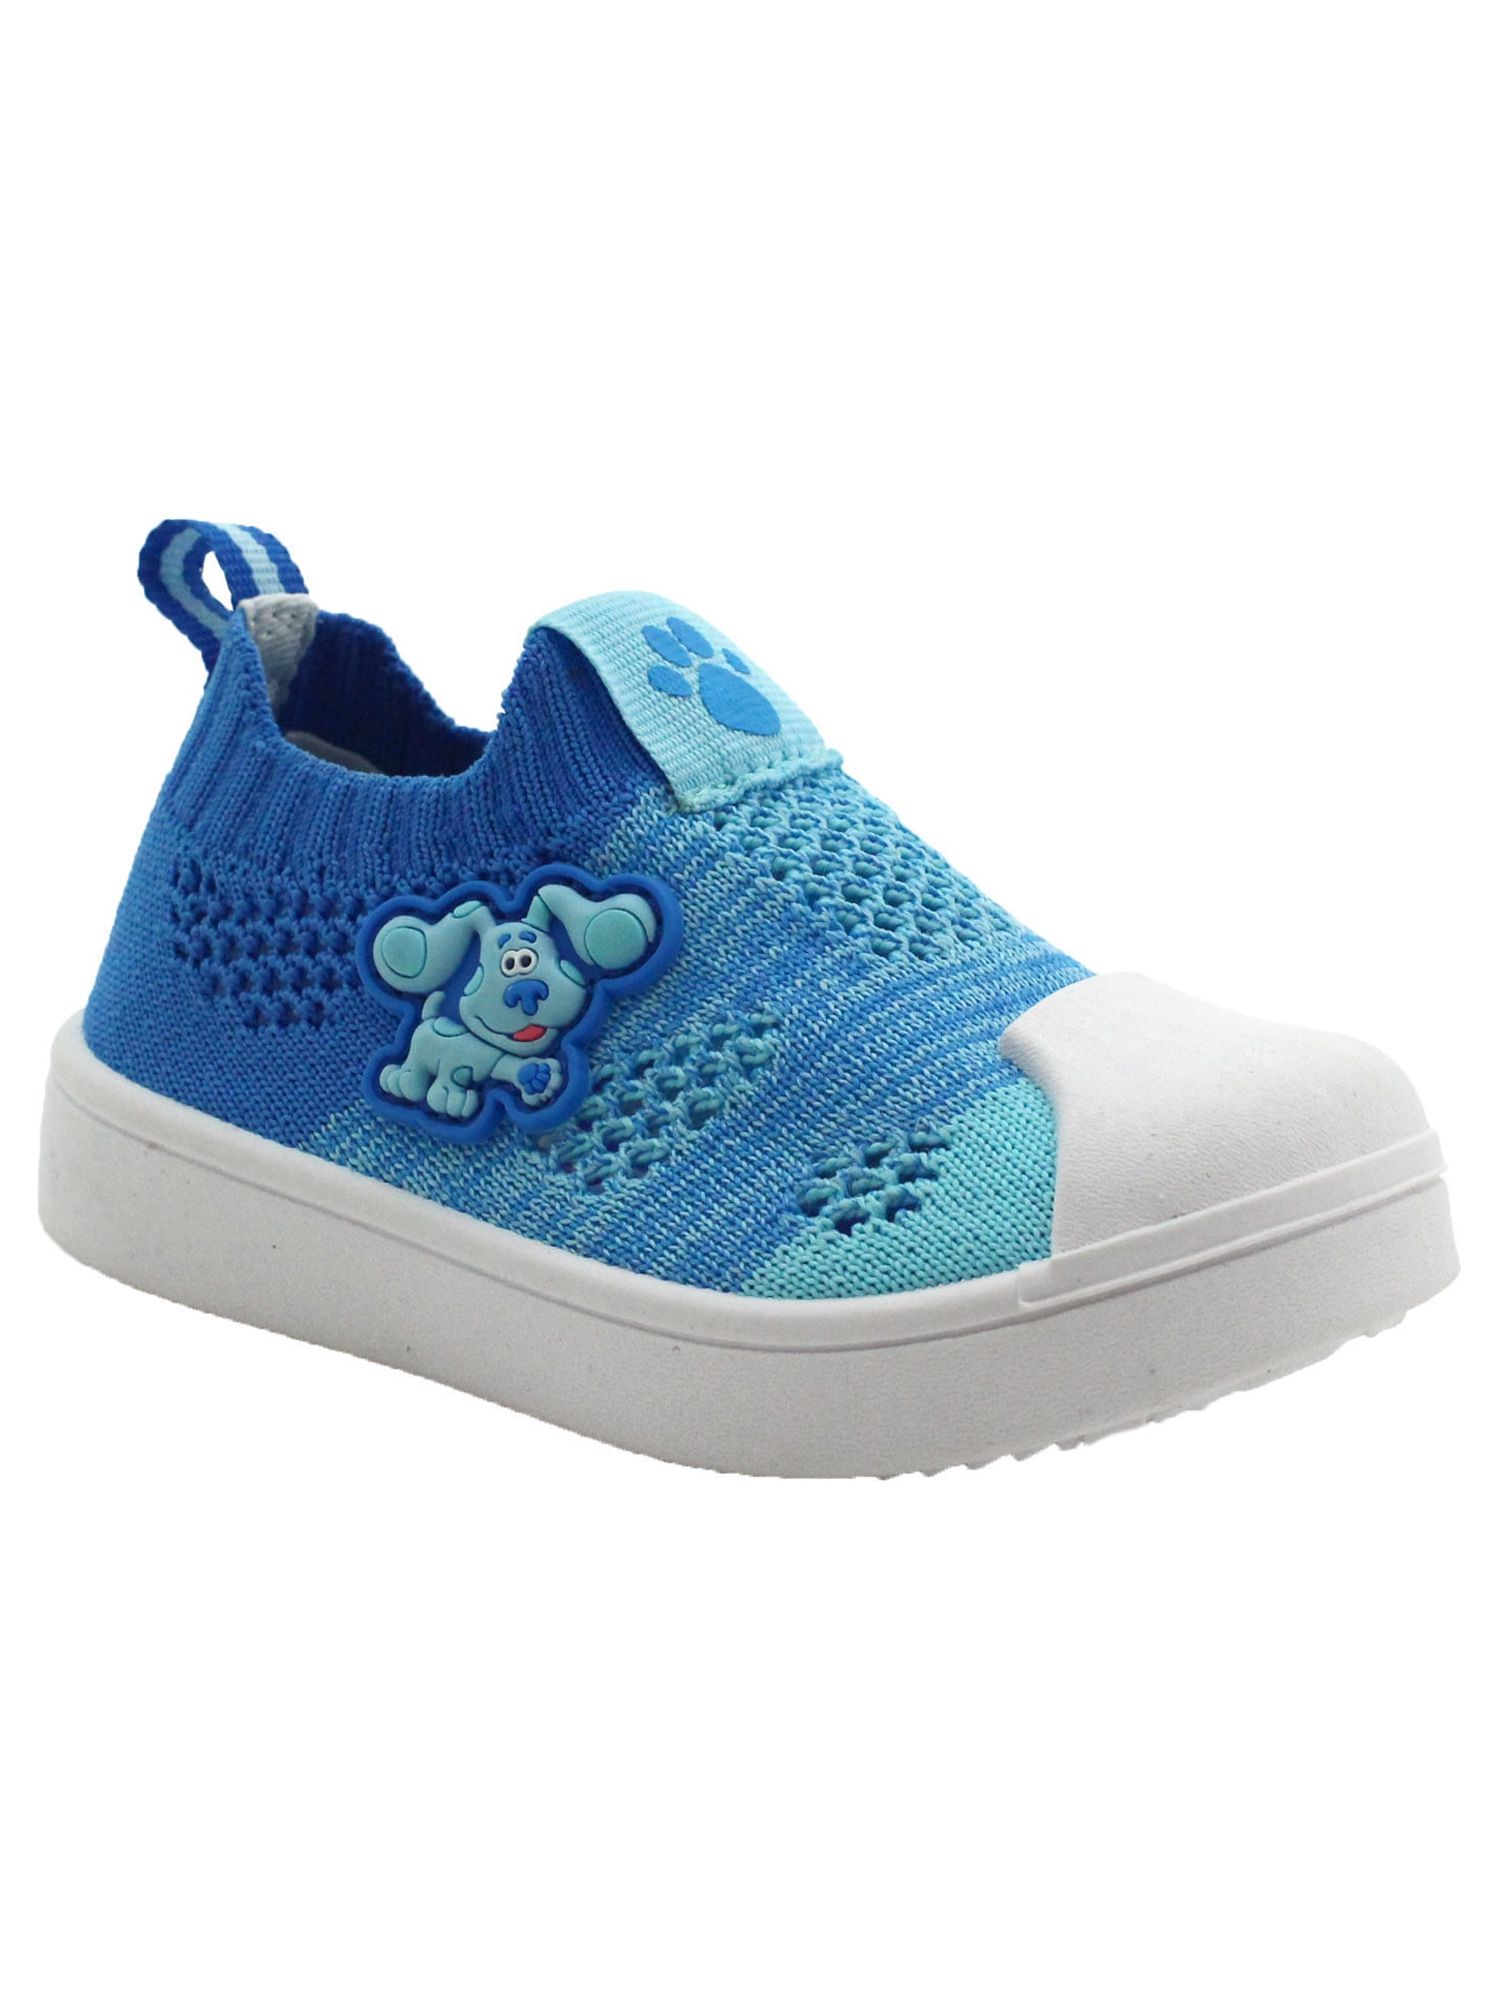 Blues Clues License Toddler Boy or Girl Casual Slip-on Shoes, Sizes 6-11 - image 1 of 6